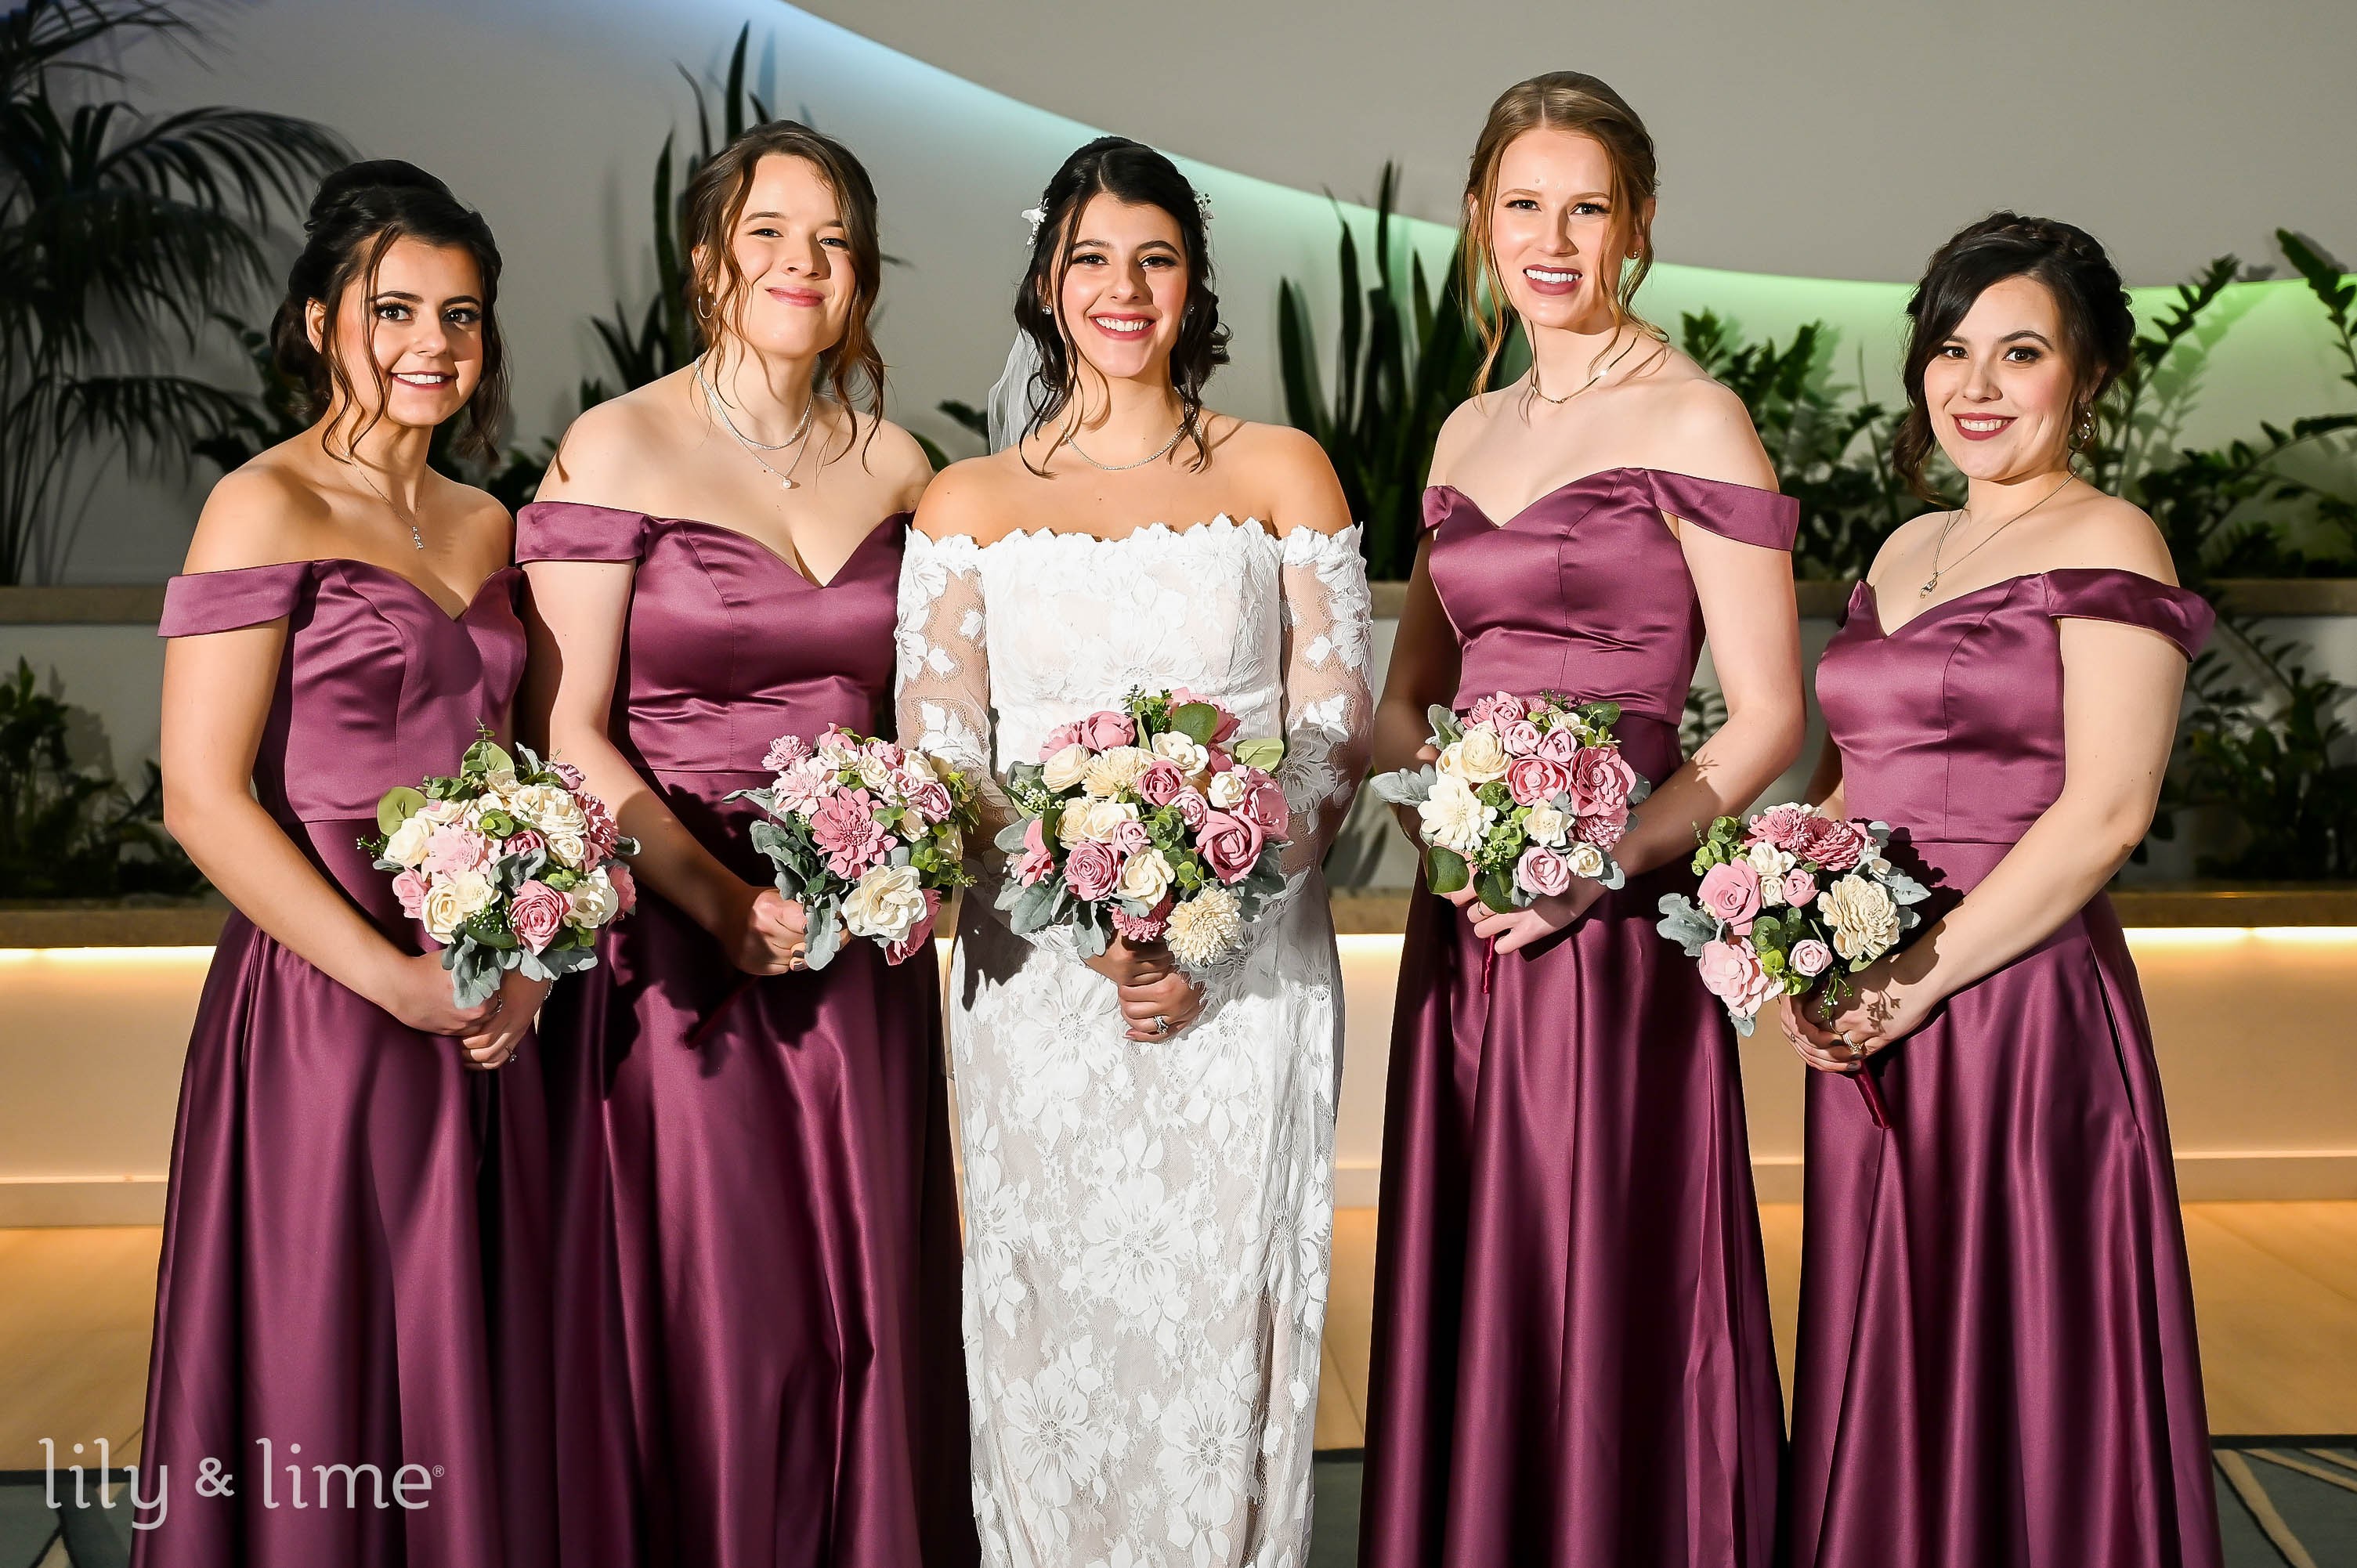 Fashion Advice: Most Flattering Necklines For Your Bridesmaids Dresses